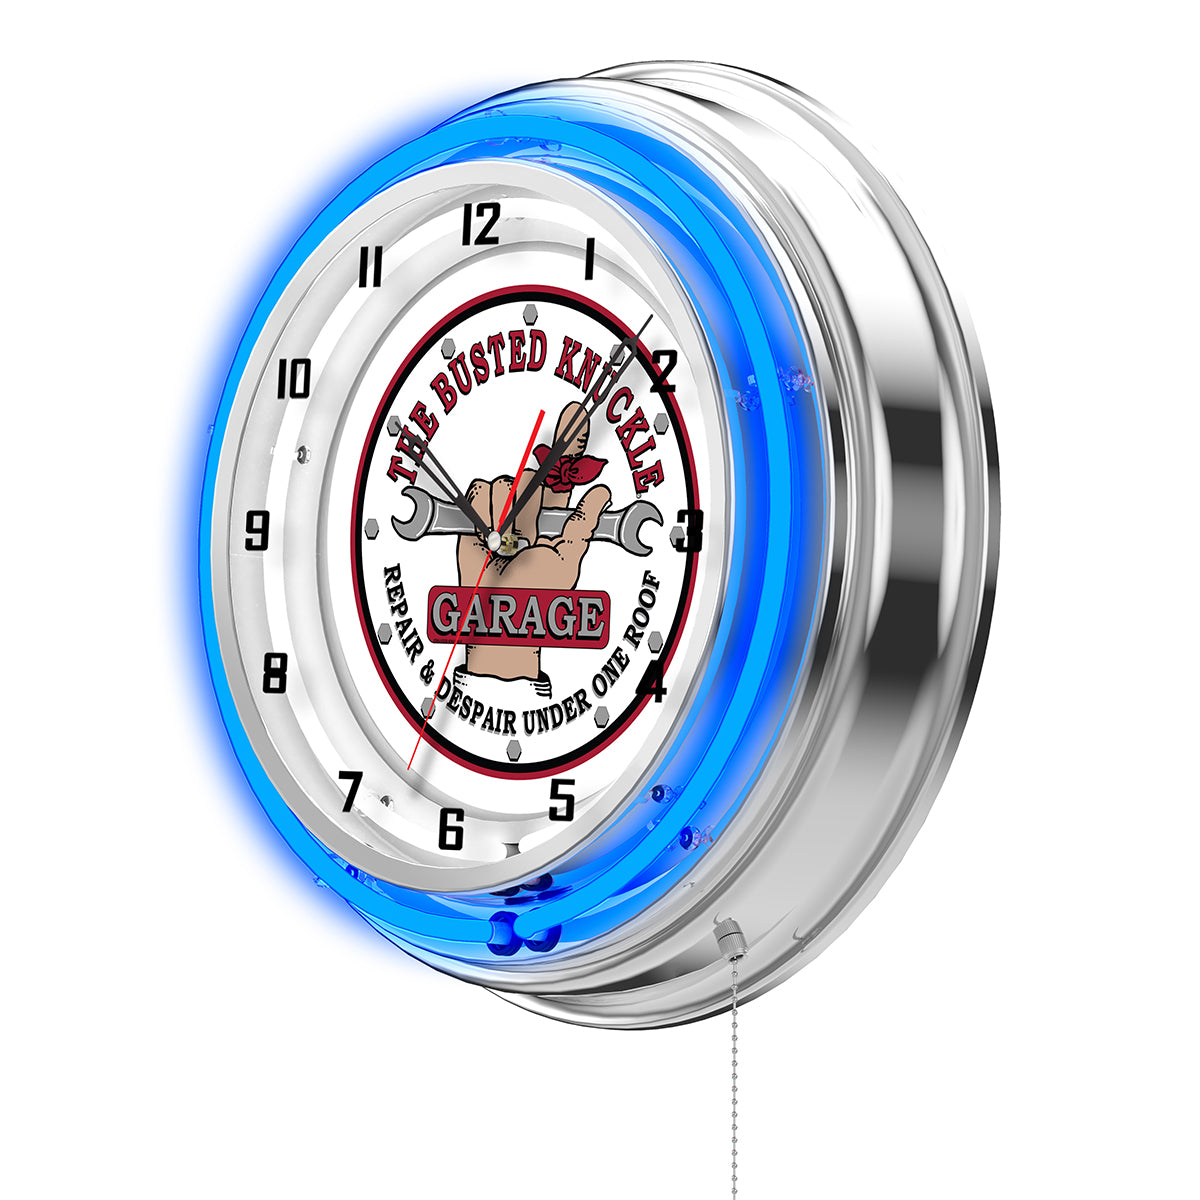 Busted Knuckle White Logo Clock - Blue Neon